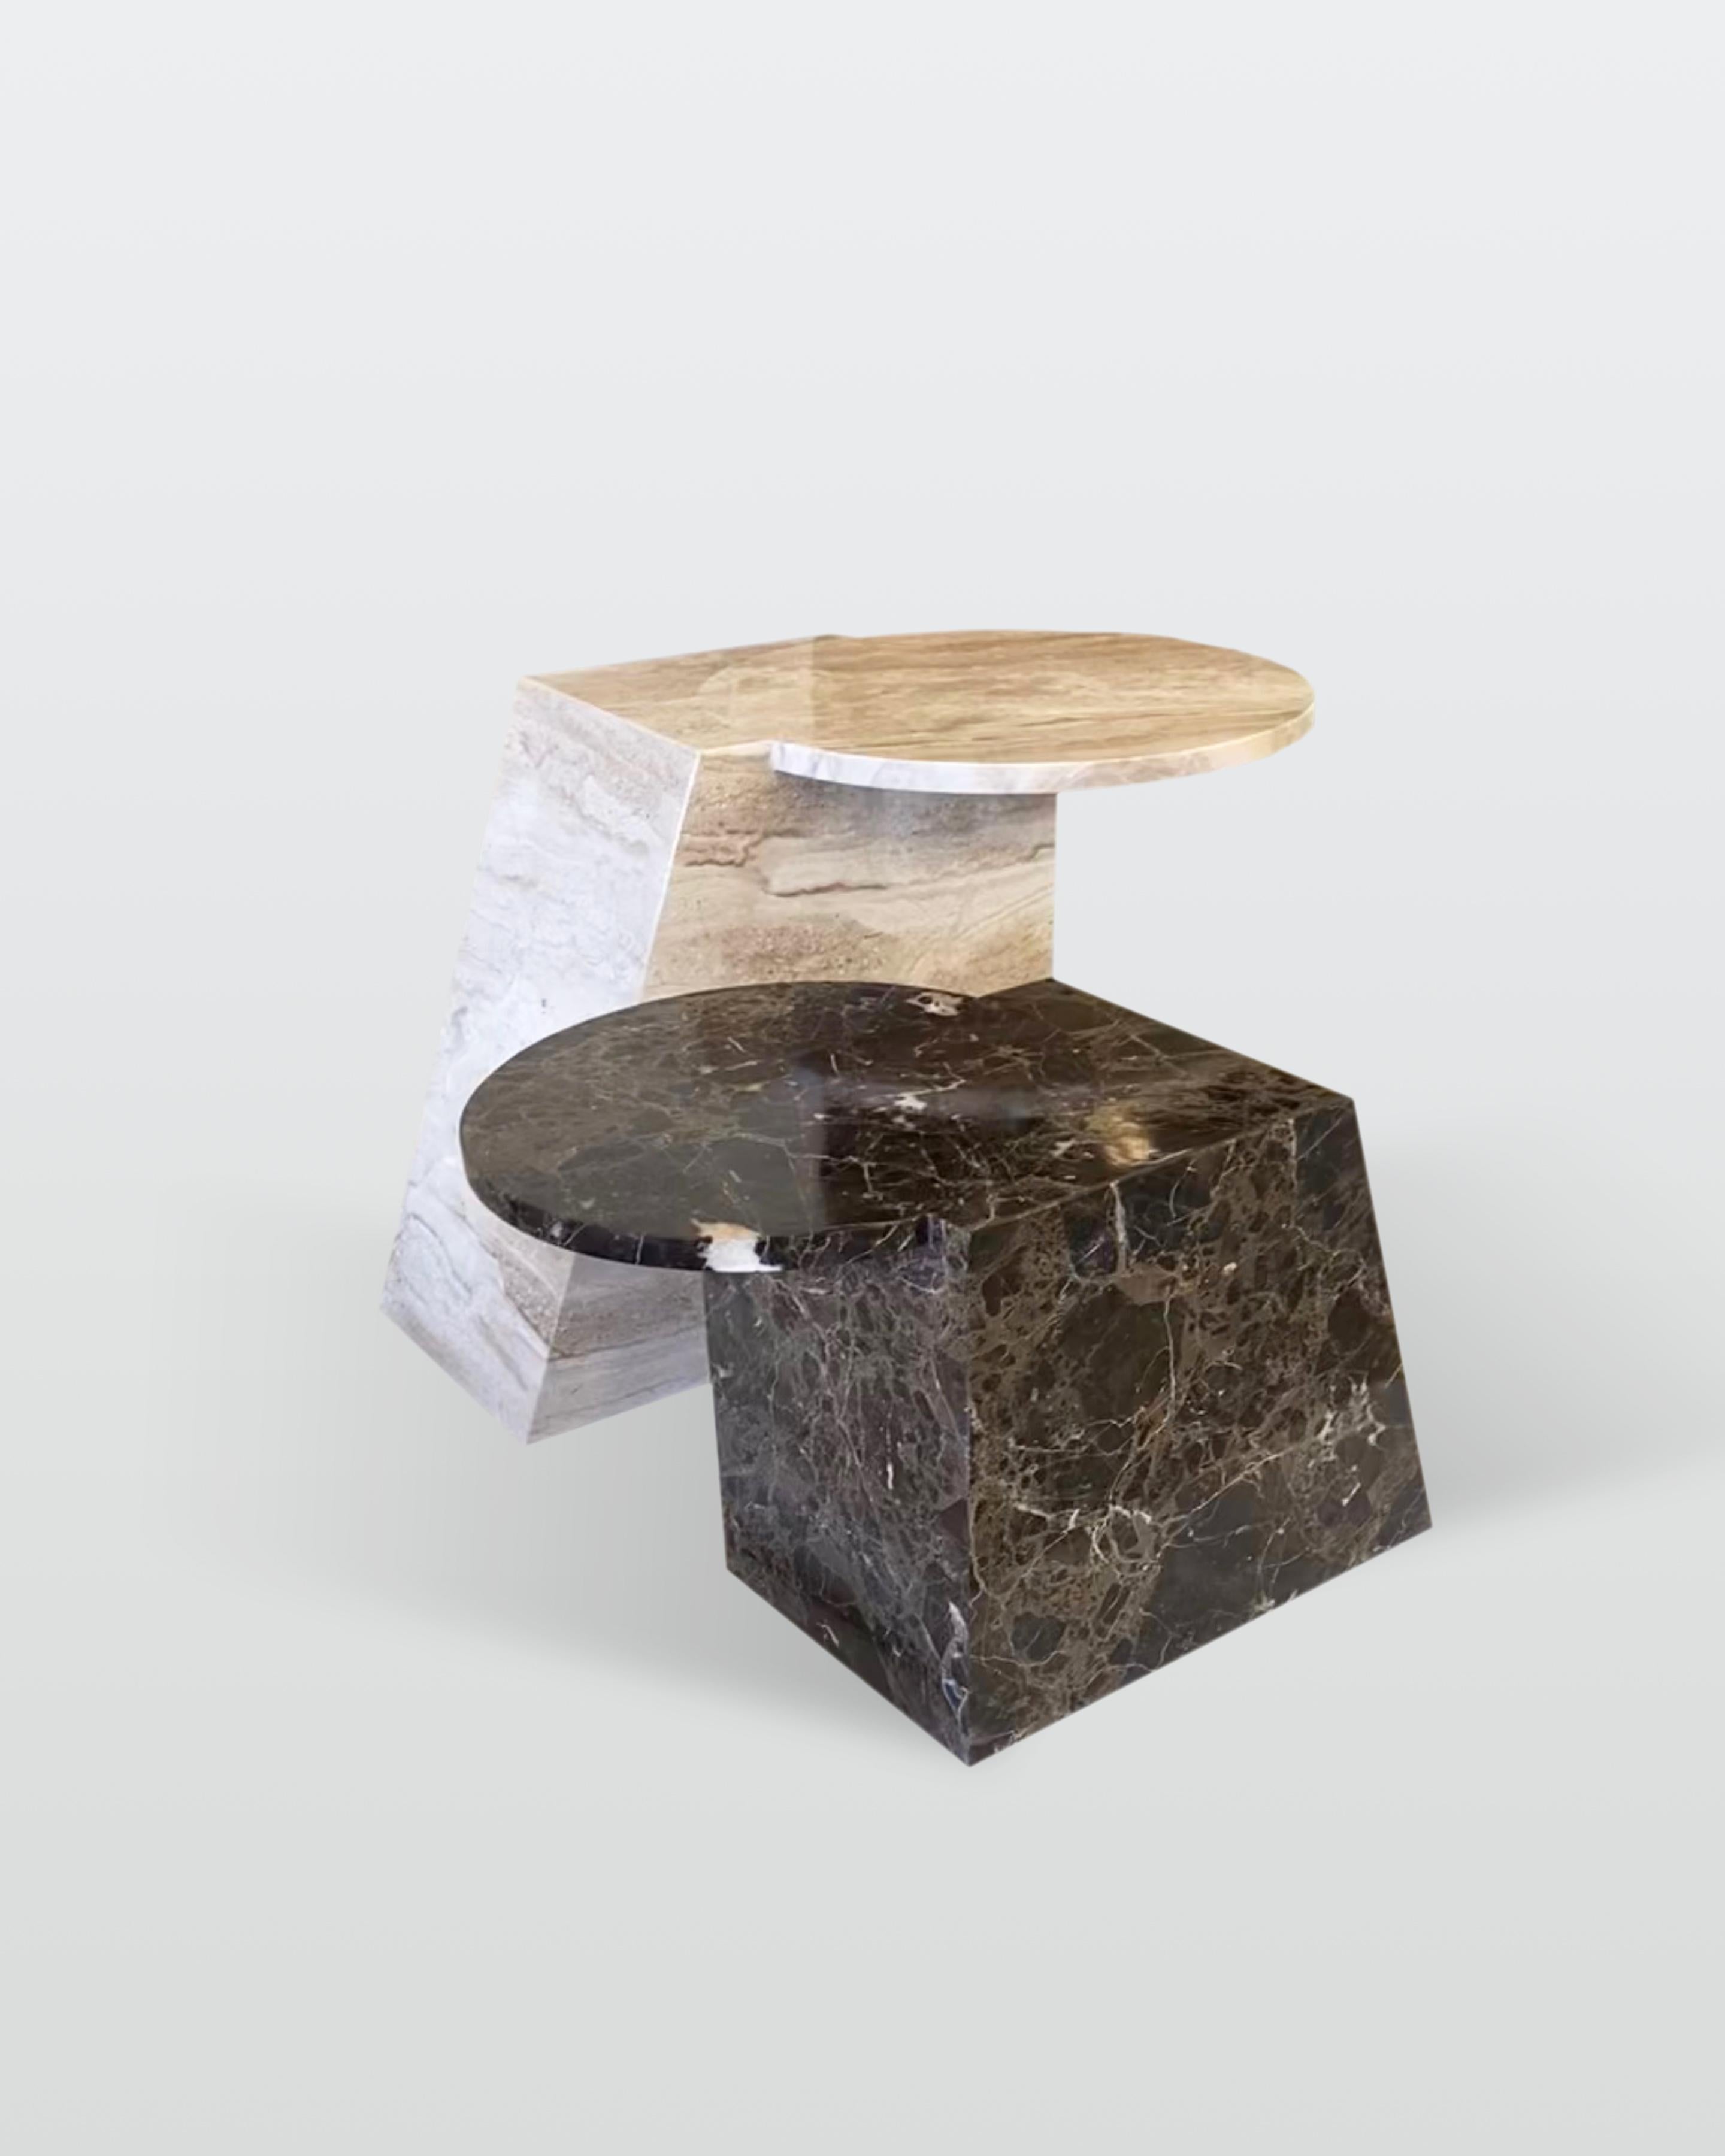 Ellements of art and architecture are combined in the design of the V tables without foregoing functionality.  The two pieces can be juxtaposed in various ways to suit the mood that you want to create.

The V tables are available in marble or in